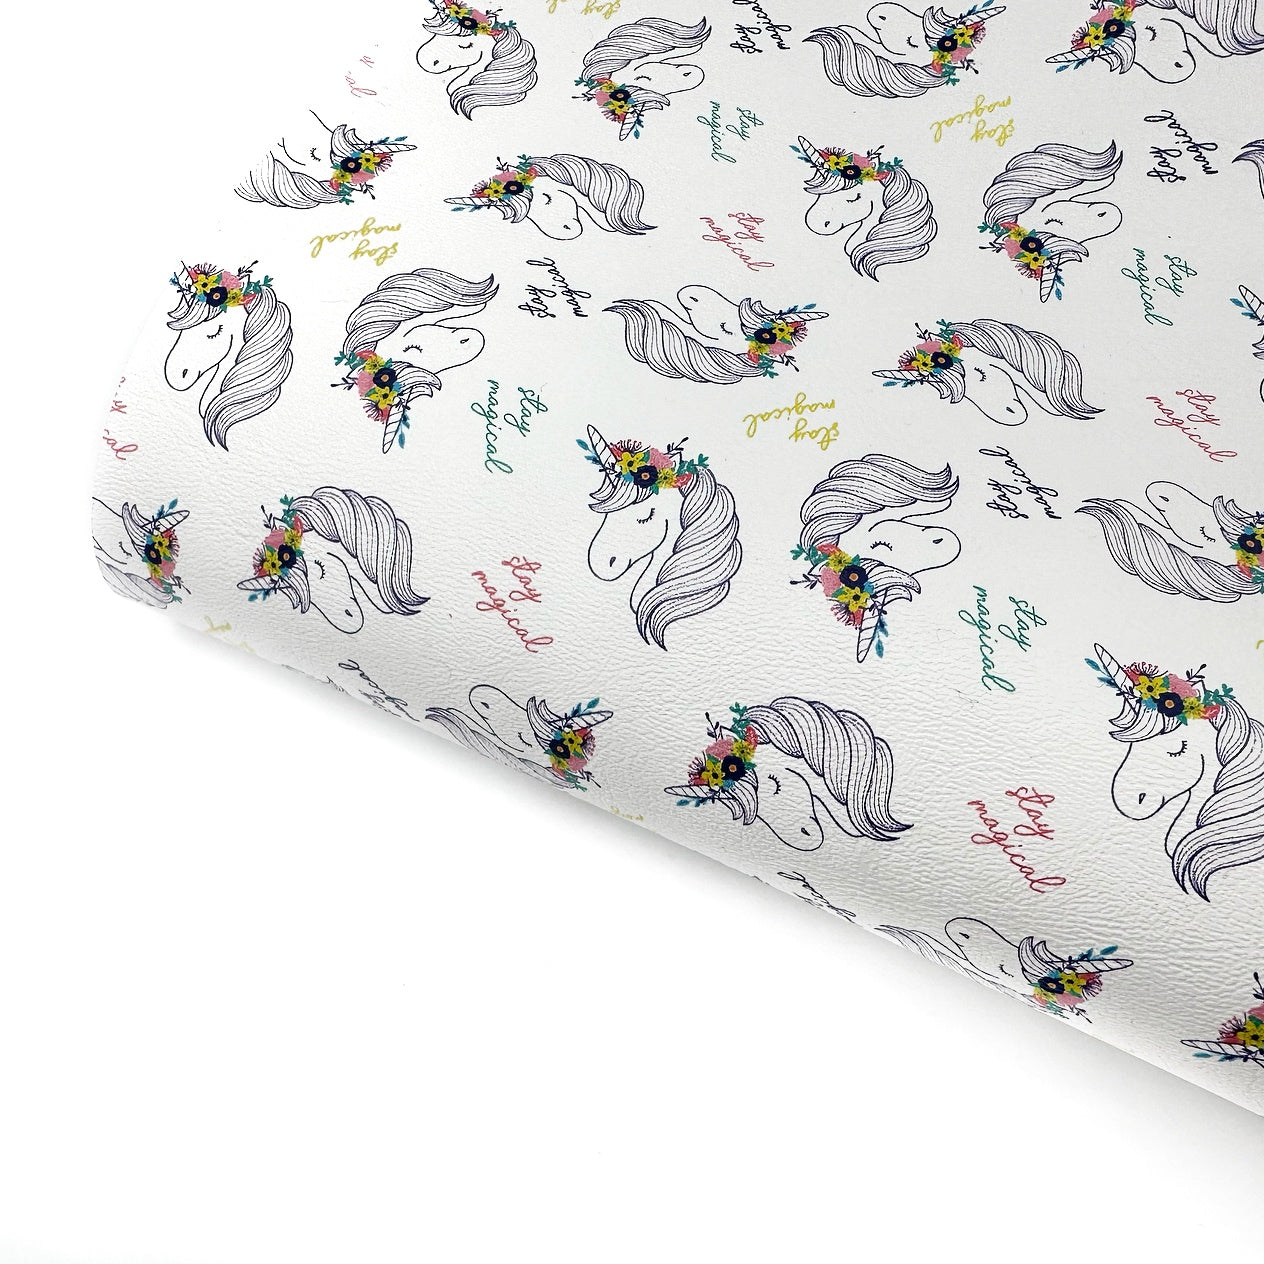 Stay Magical Unicorn Premium Faux Leather Fabric Sheets